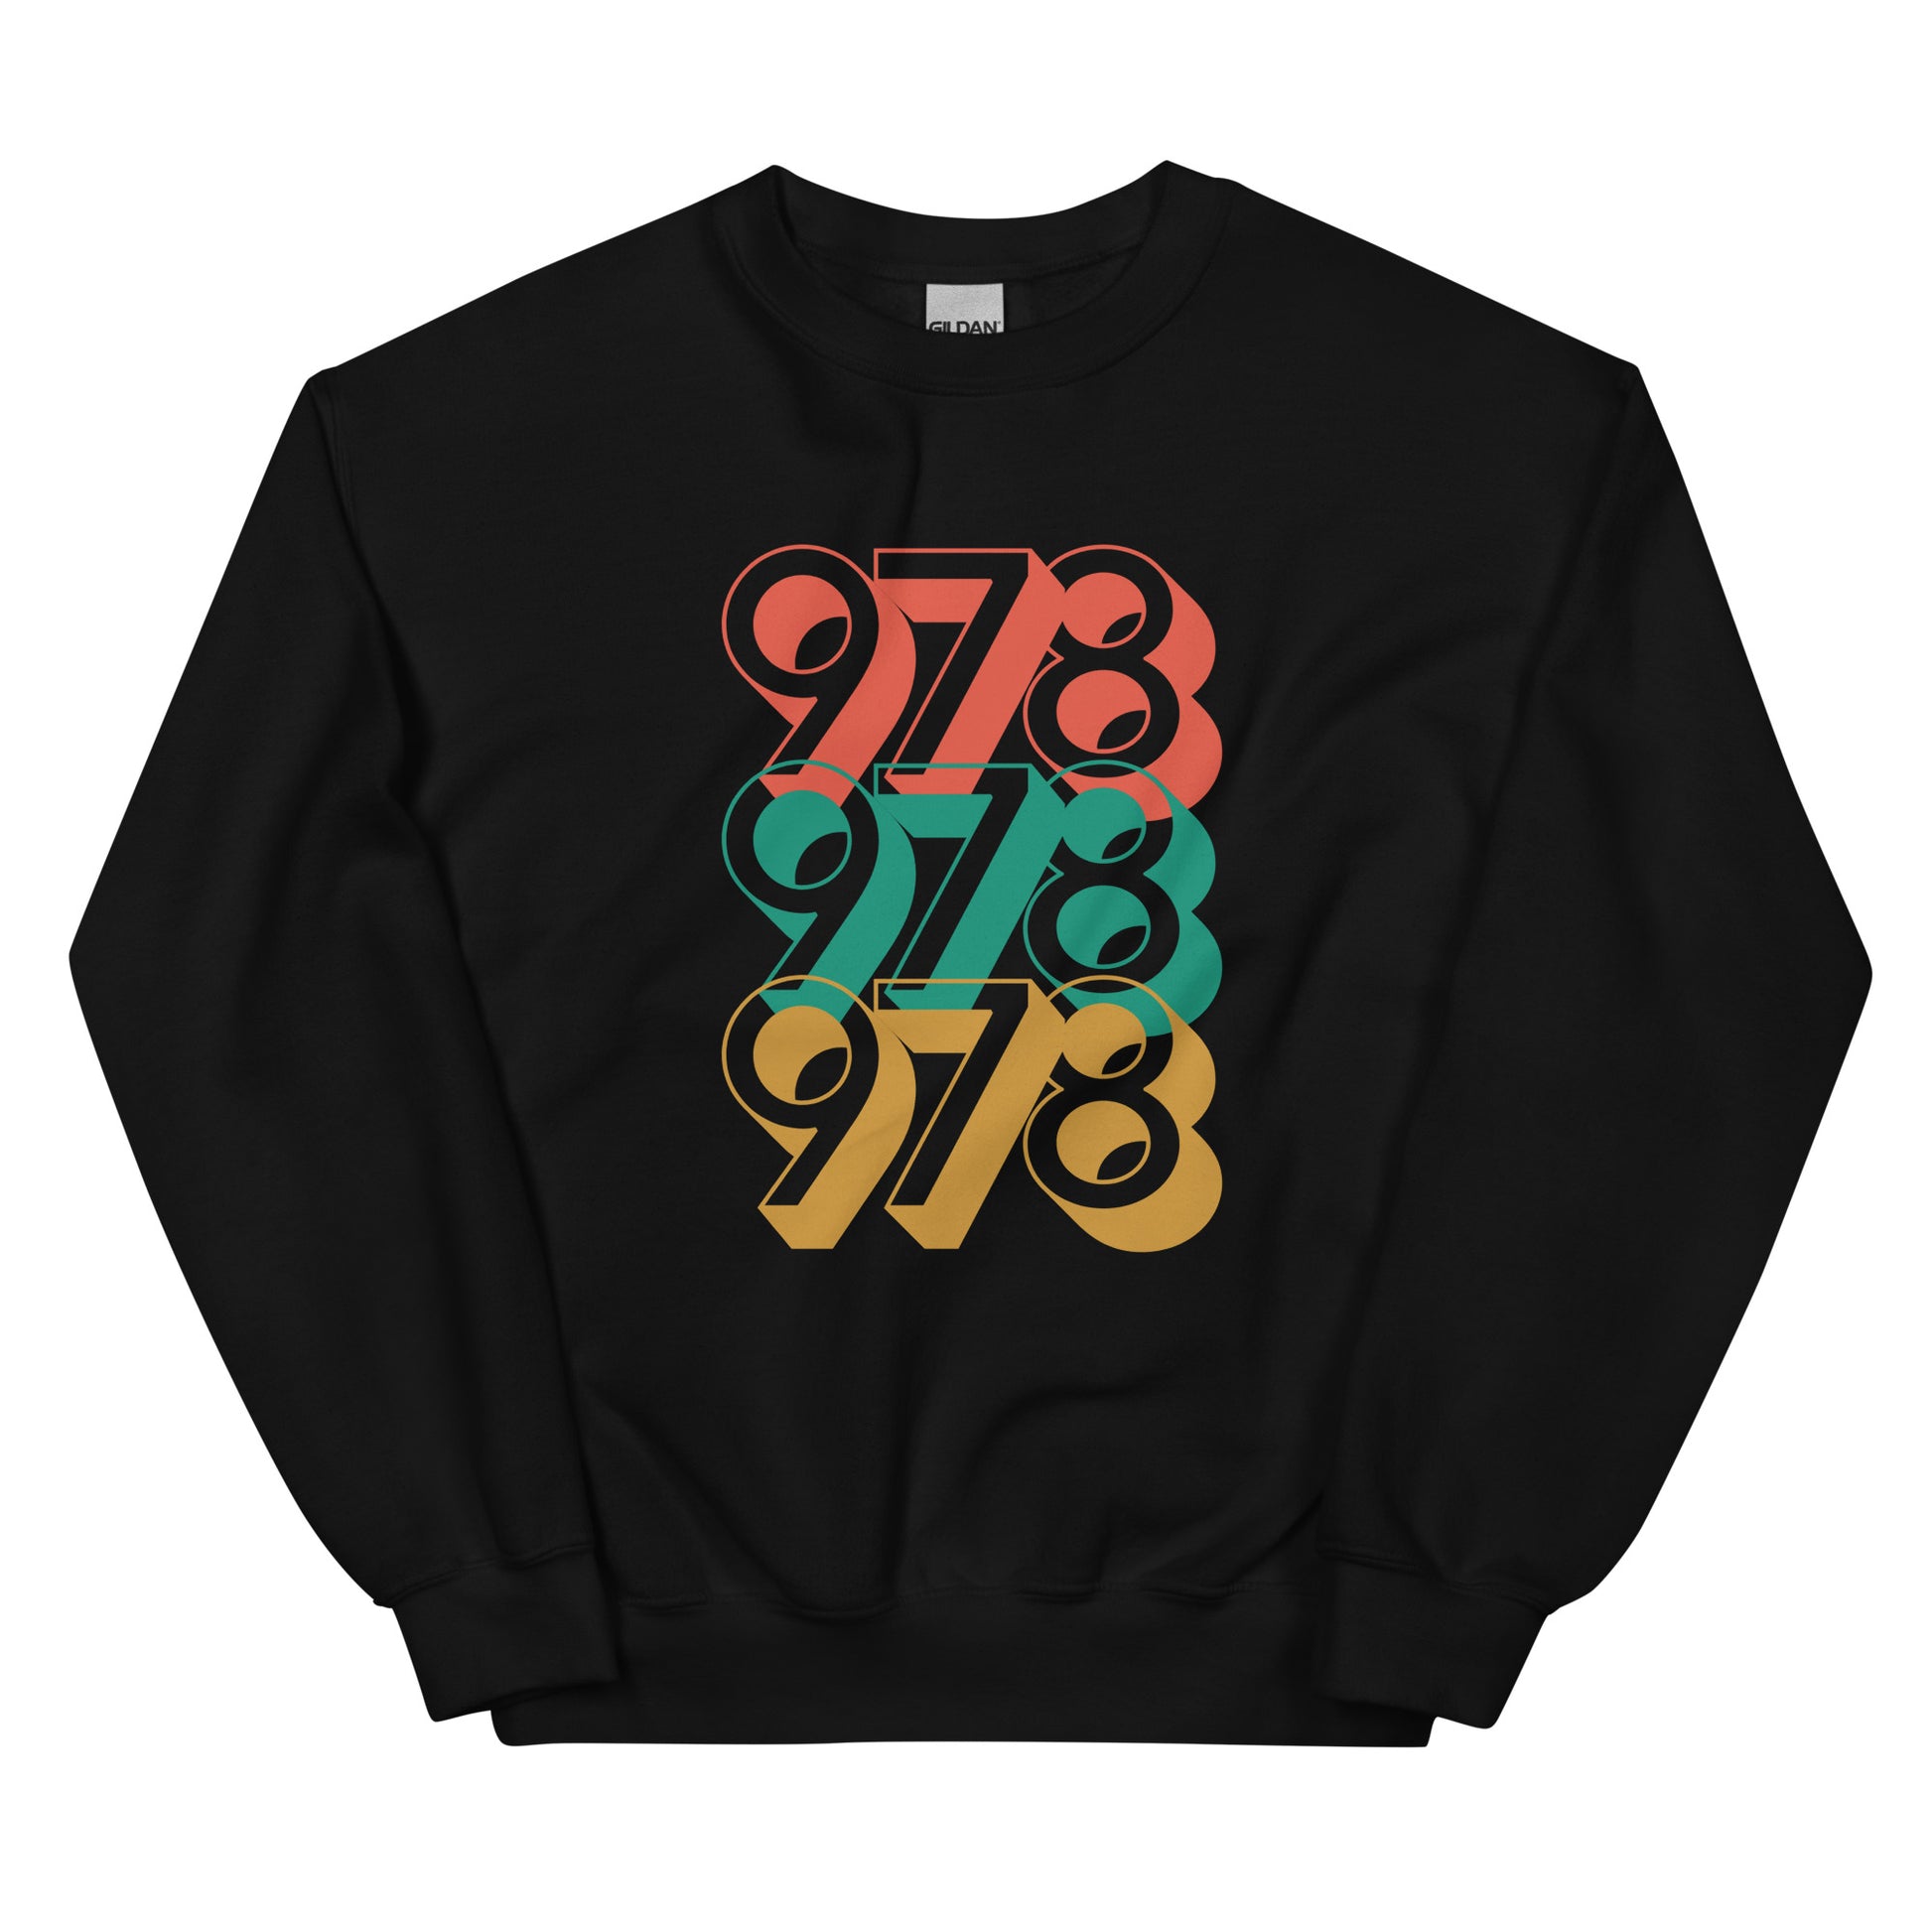 black crewneck with three 978s in red green and yellow